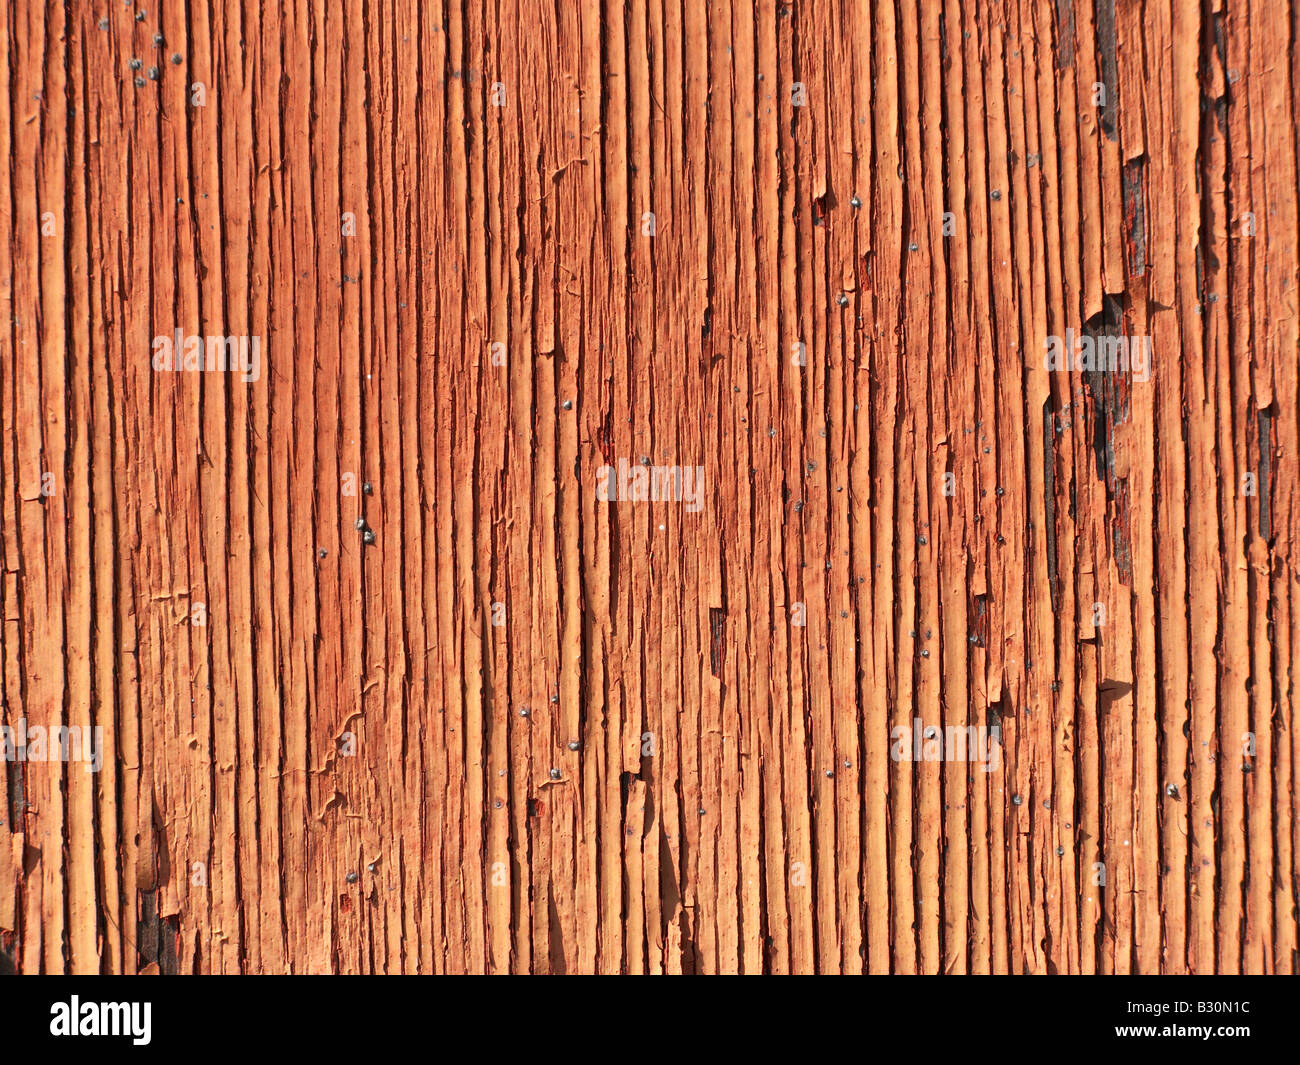 Abstract background close up surface texture Stock Photo